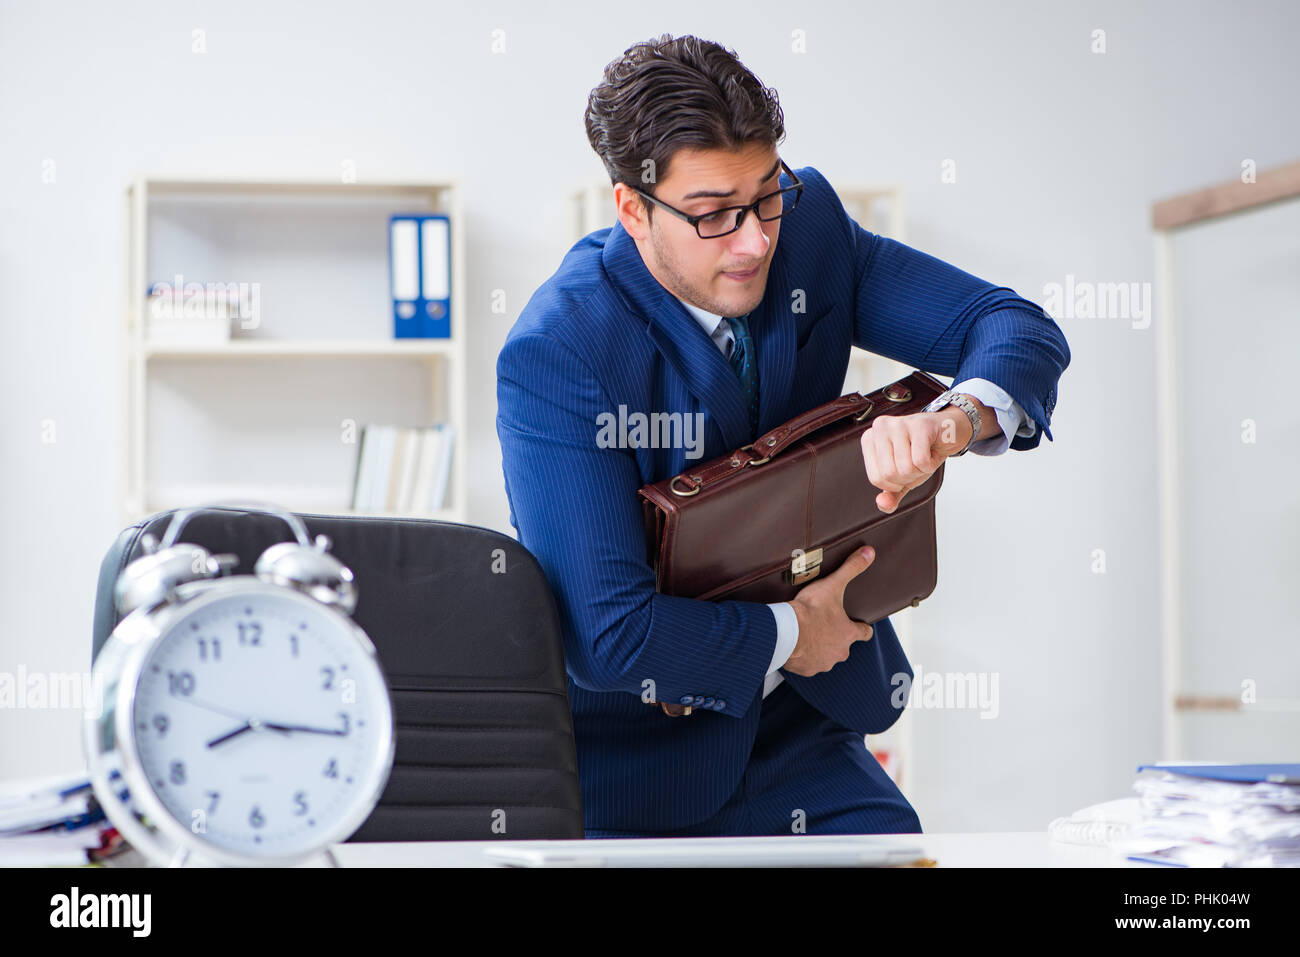 Businessman in bad time management concept Stock Photo